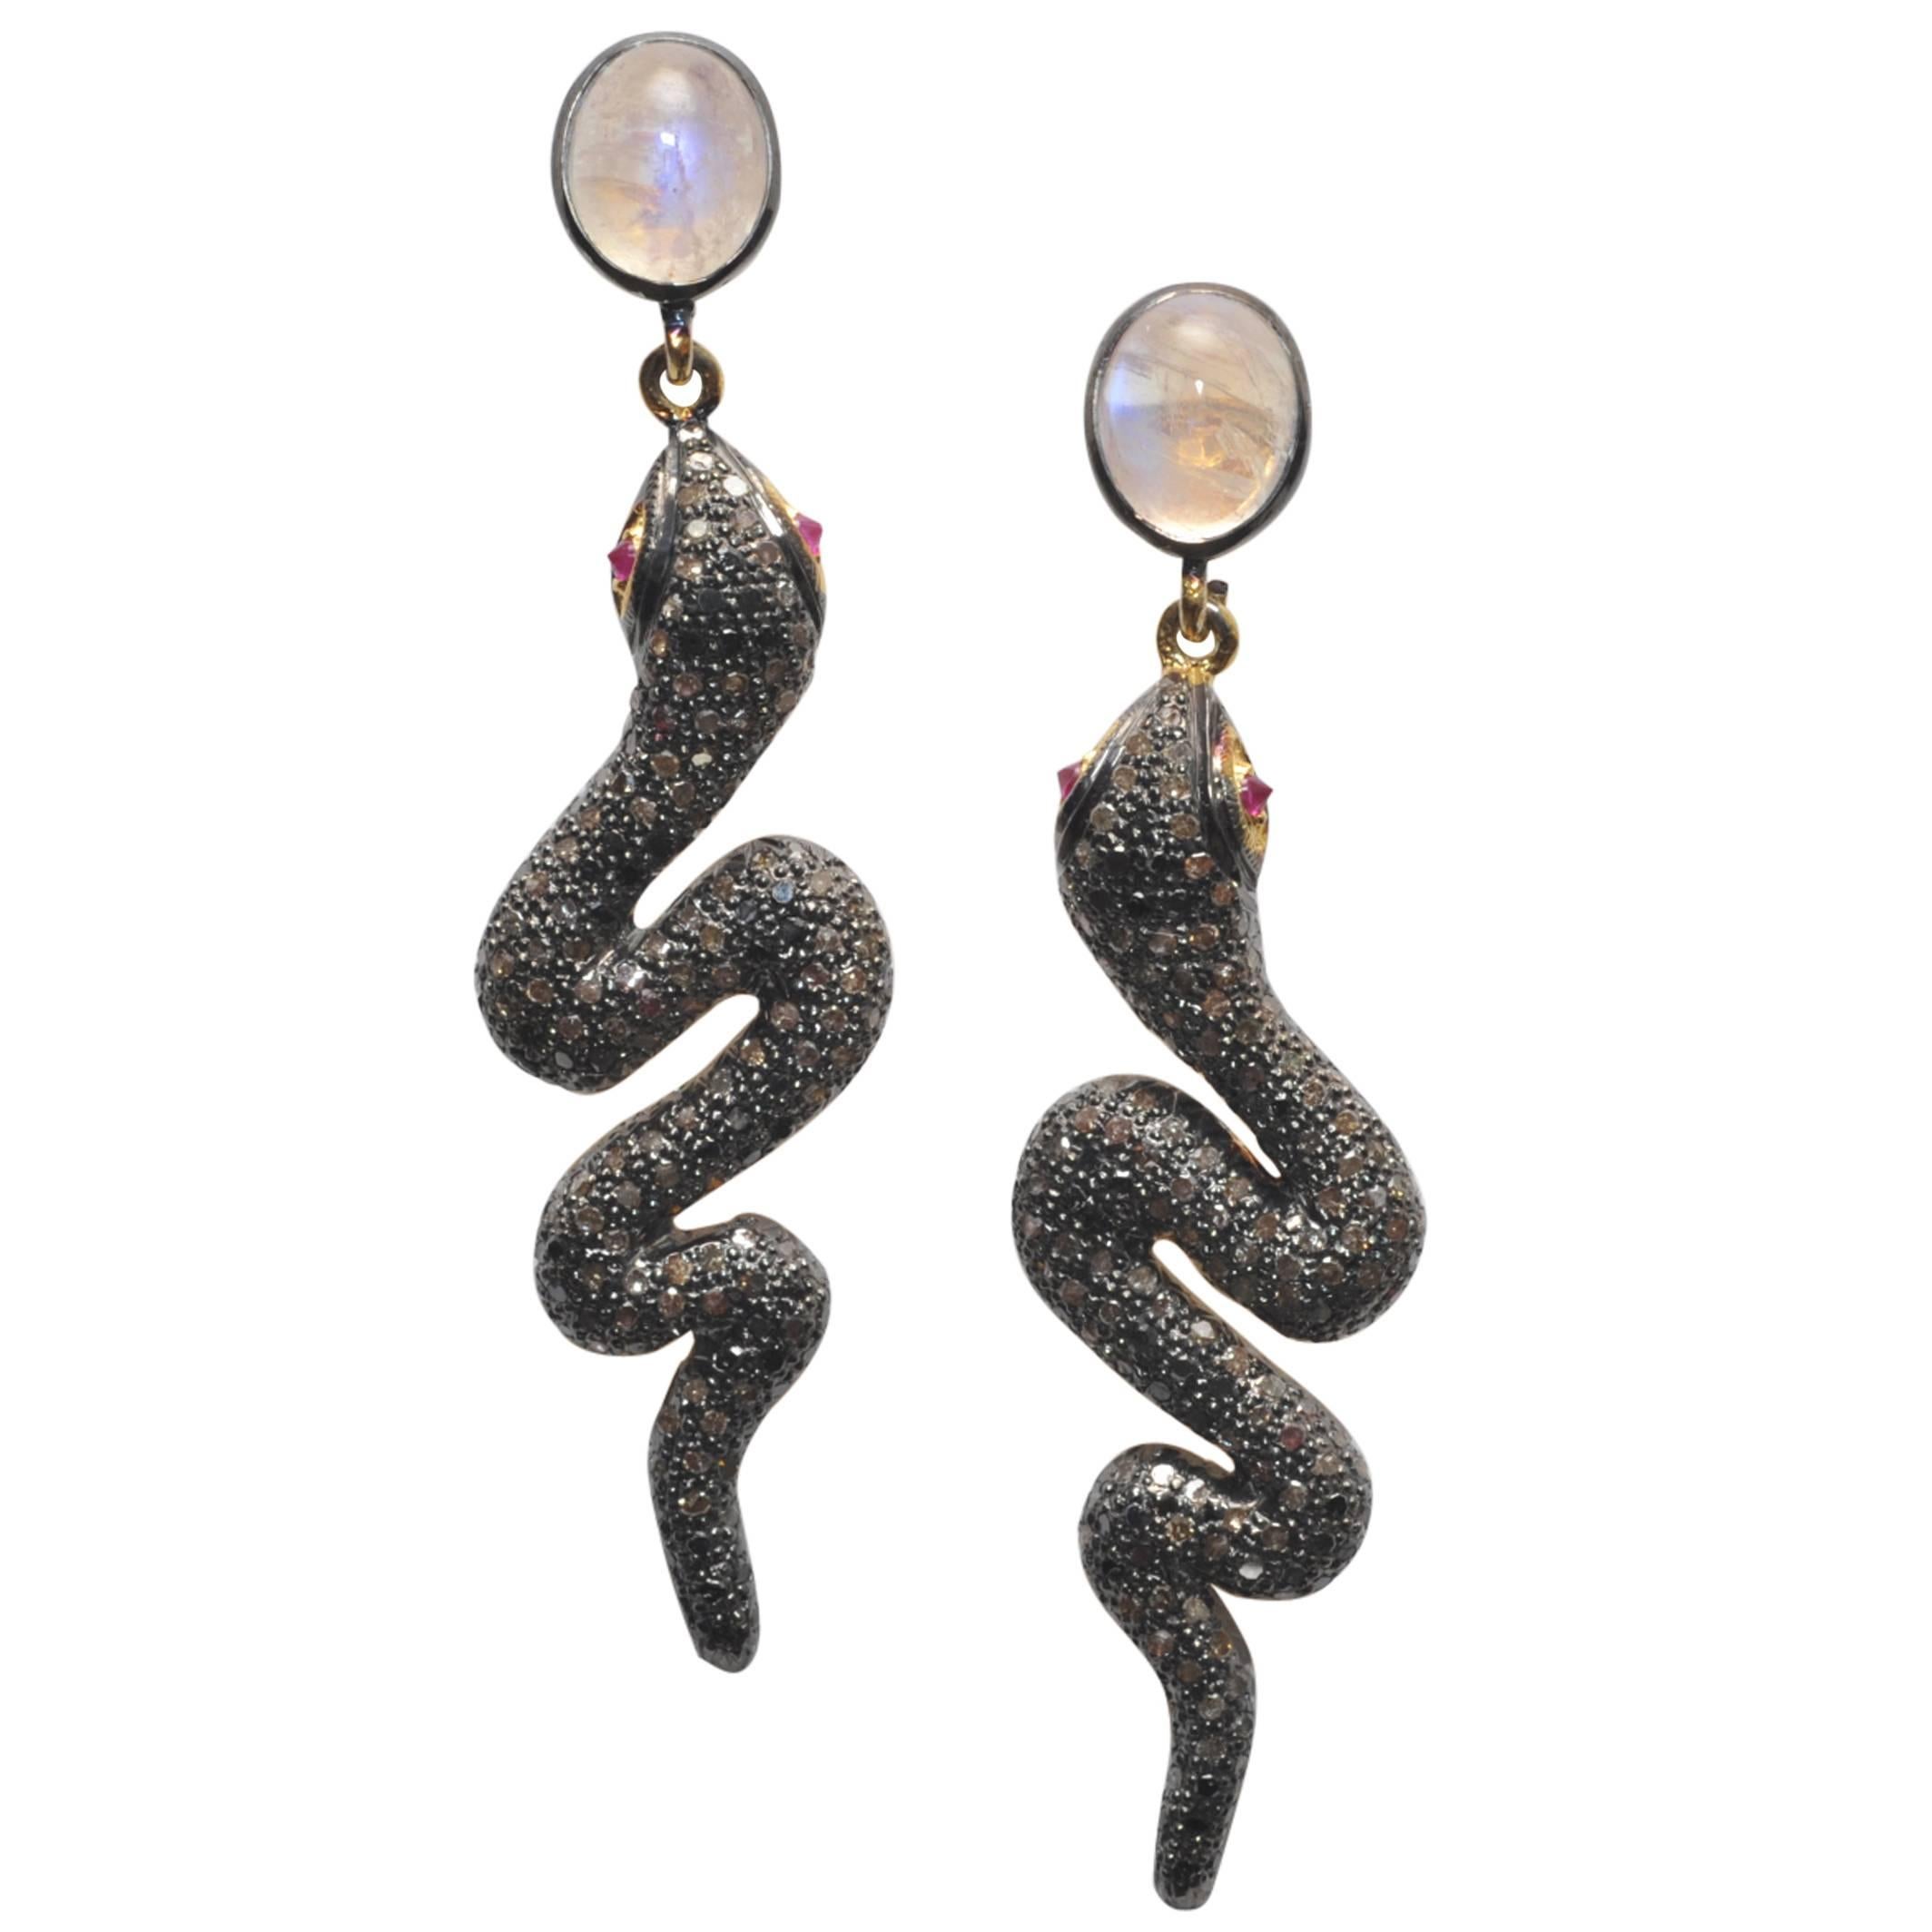 Rose Quartz and Pave` Diamond Snake Earrings with Ruby Eyes